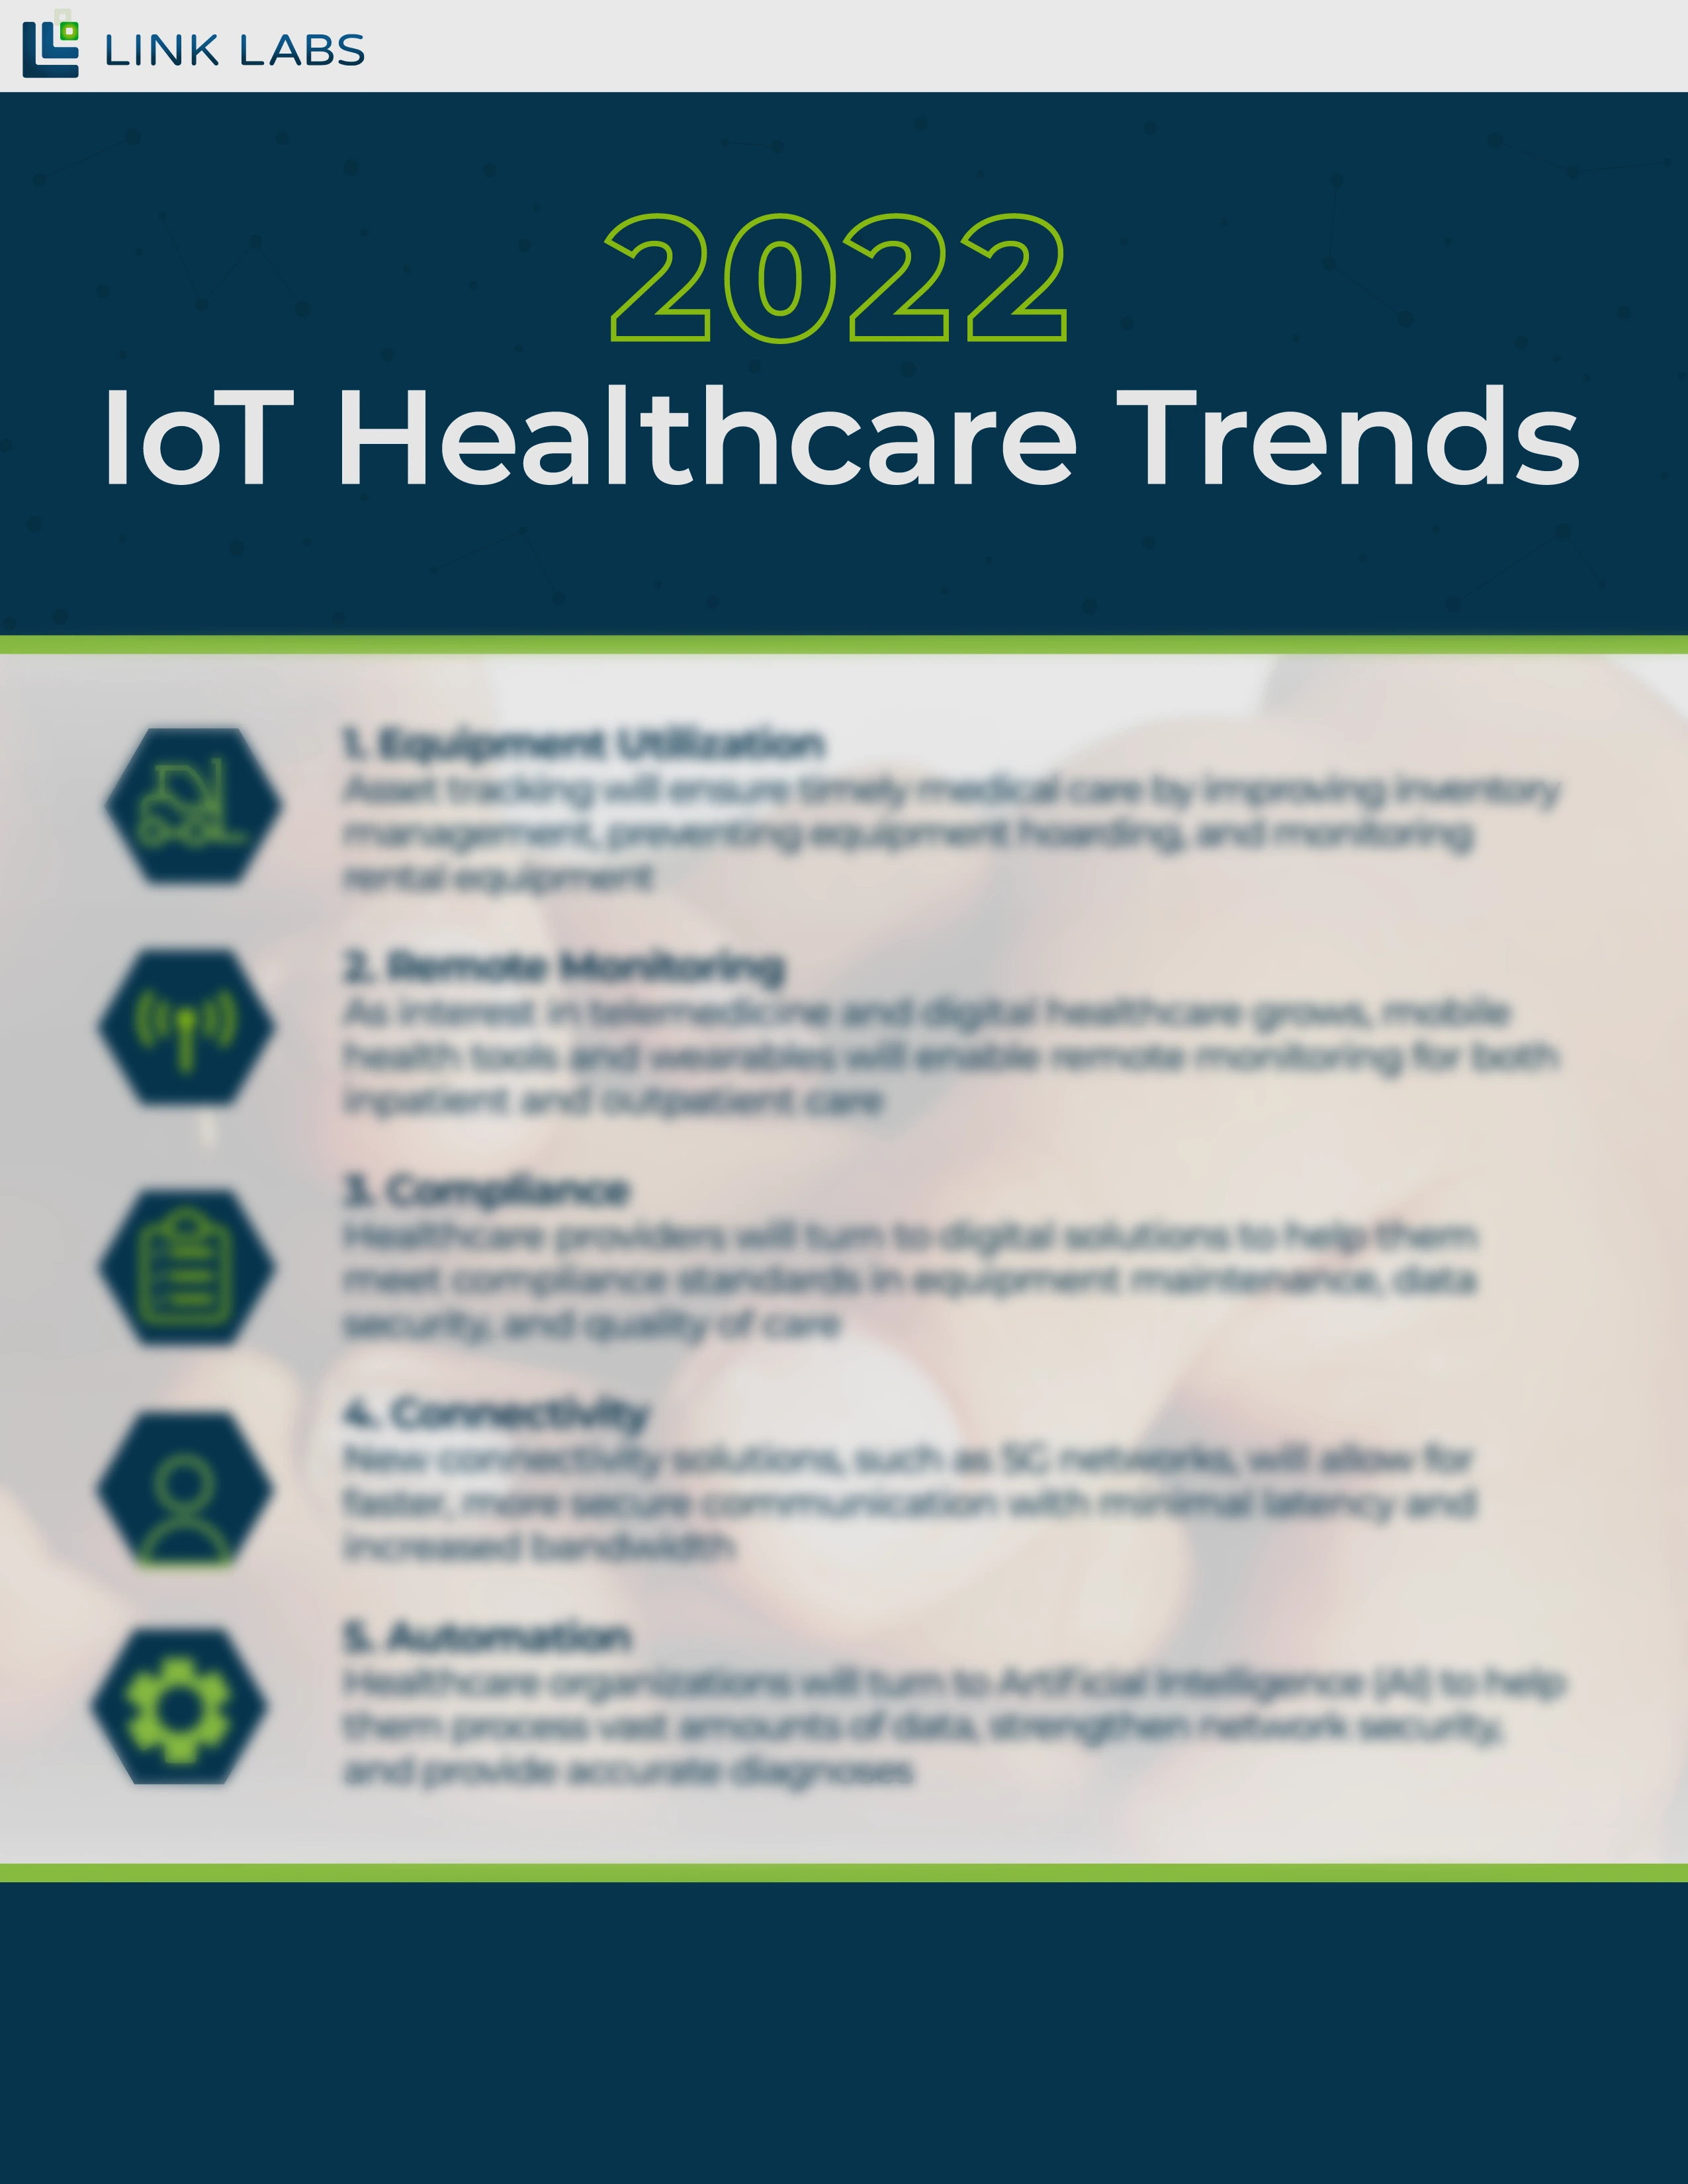 2022-IoT-Healthcare-Trends-Infographic-Blurred